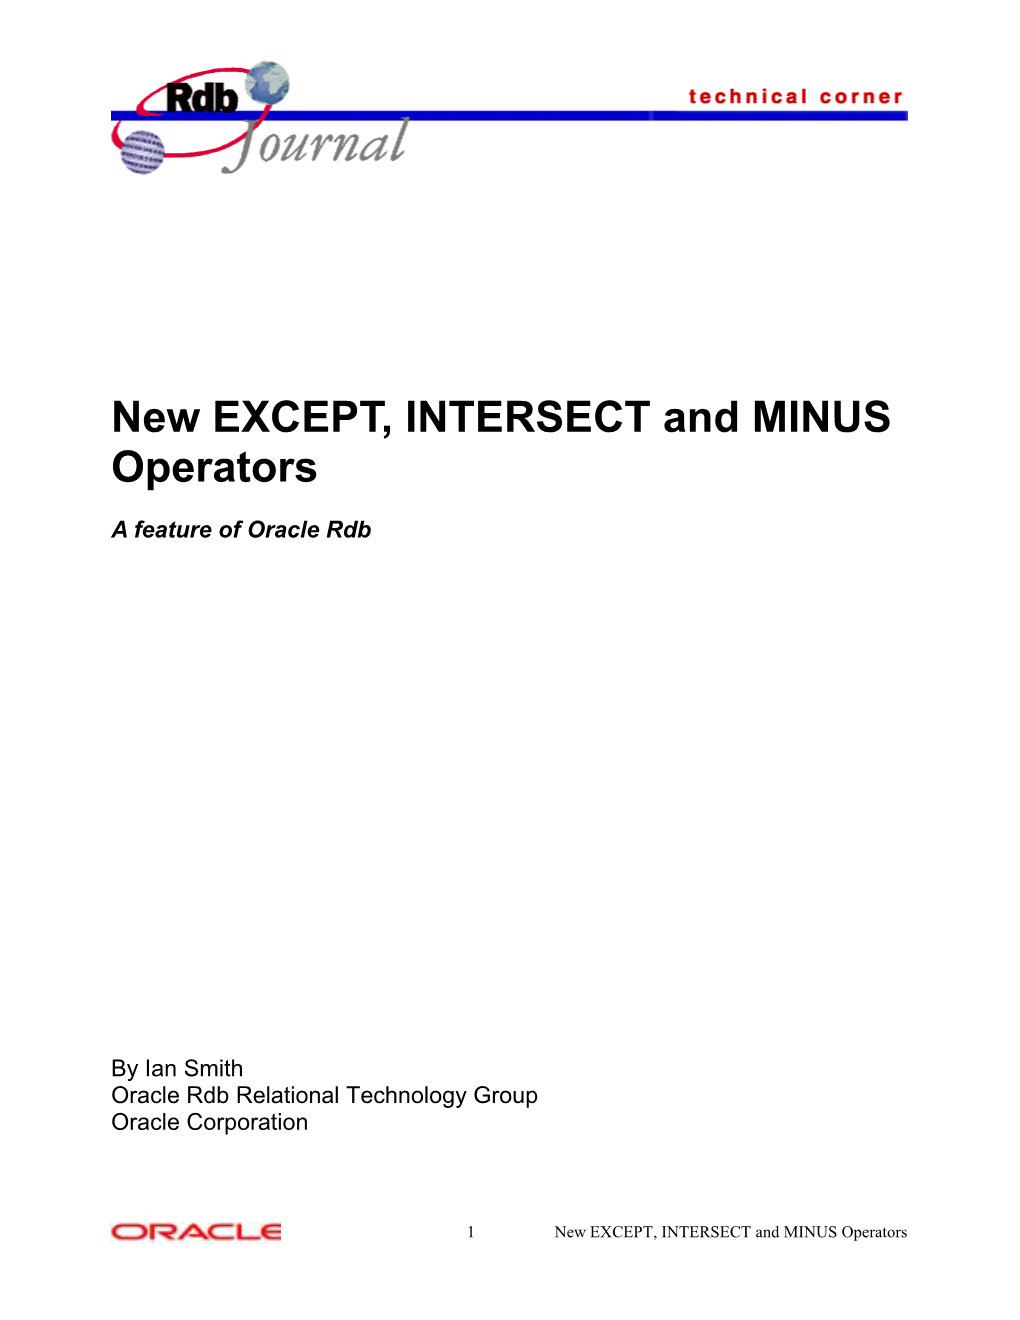 New XCEPT, INTERSECT and MINUS Operators